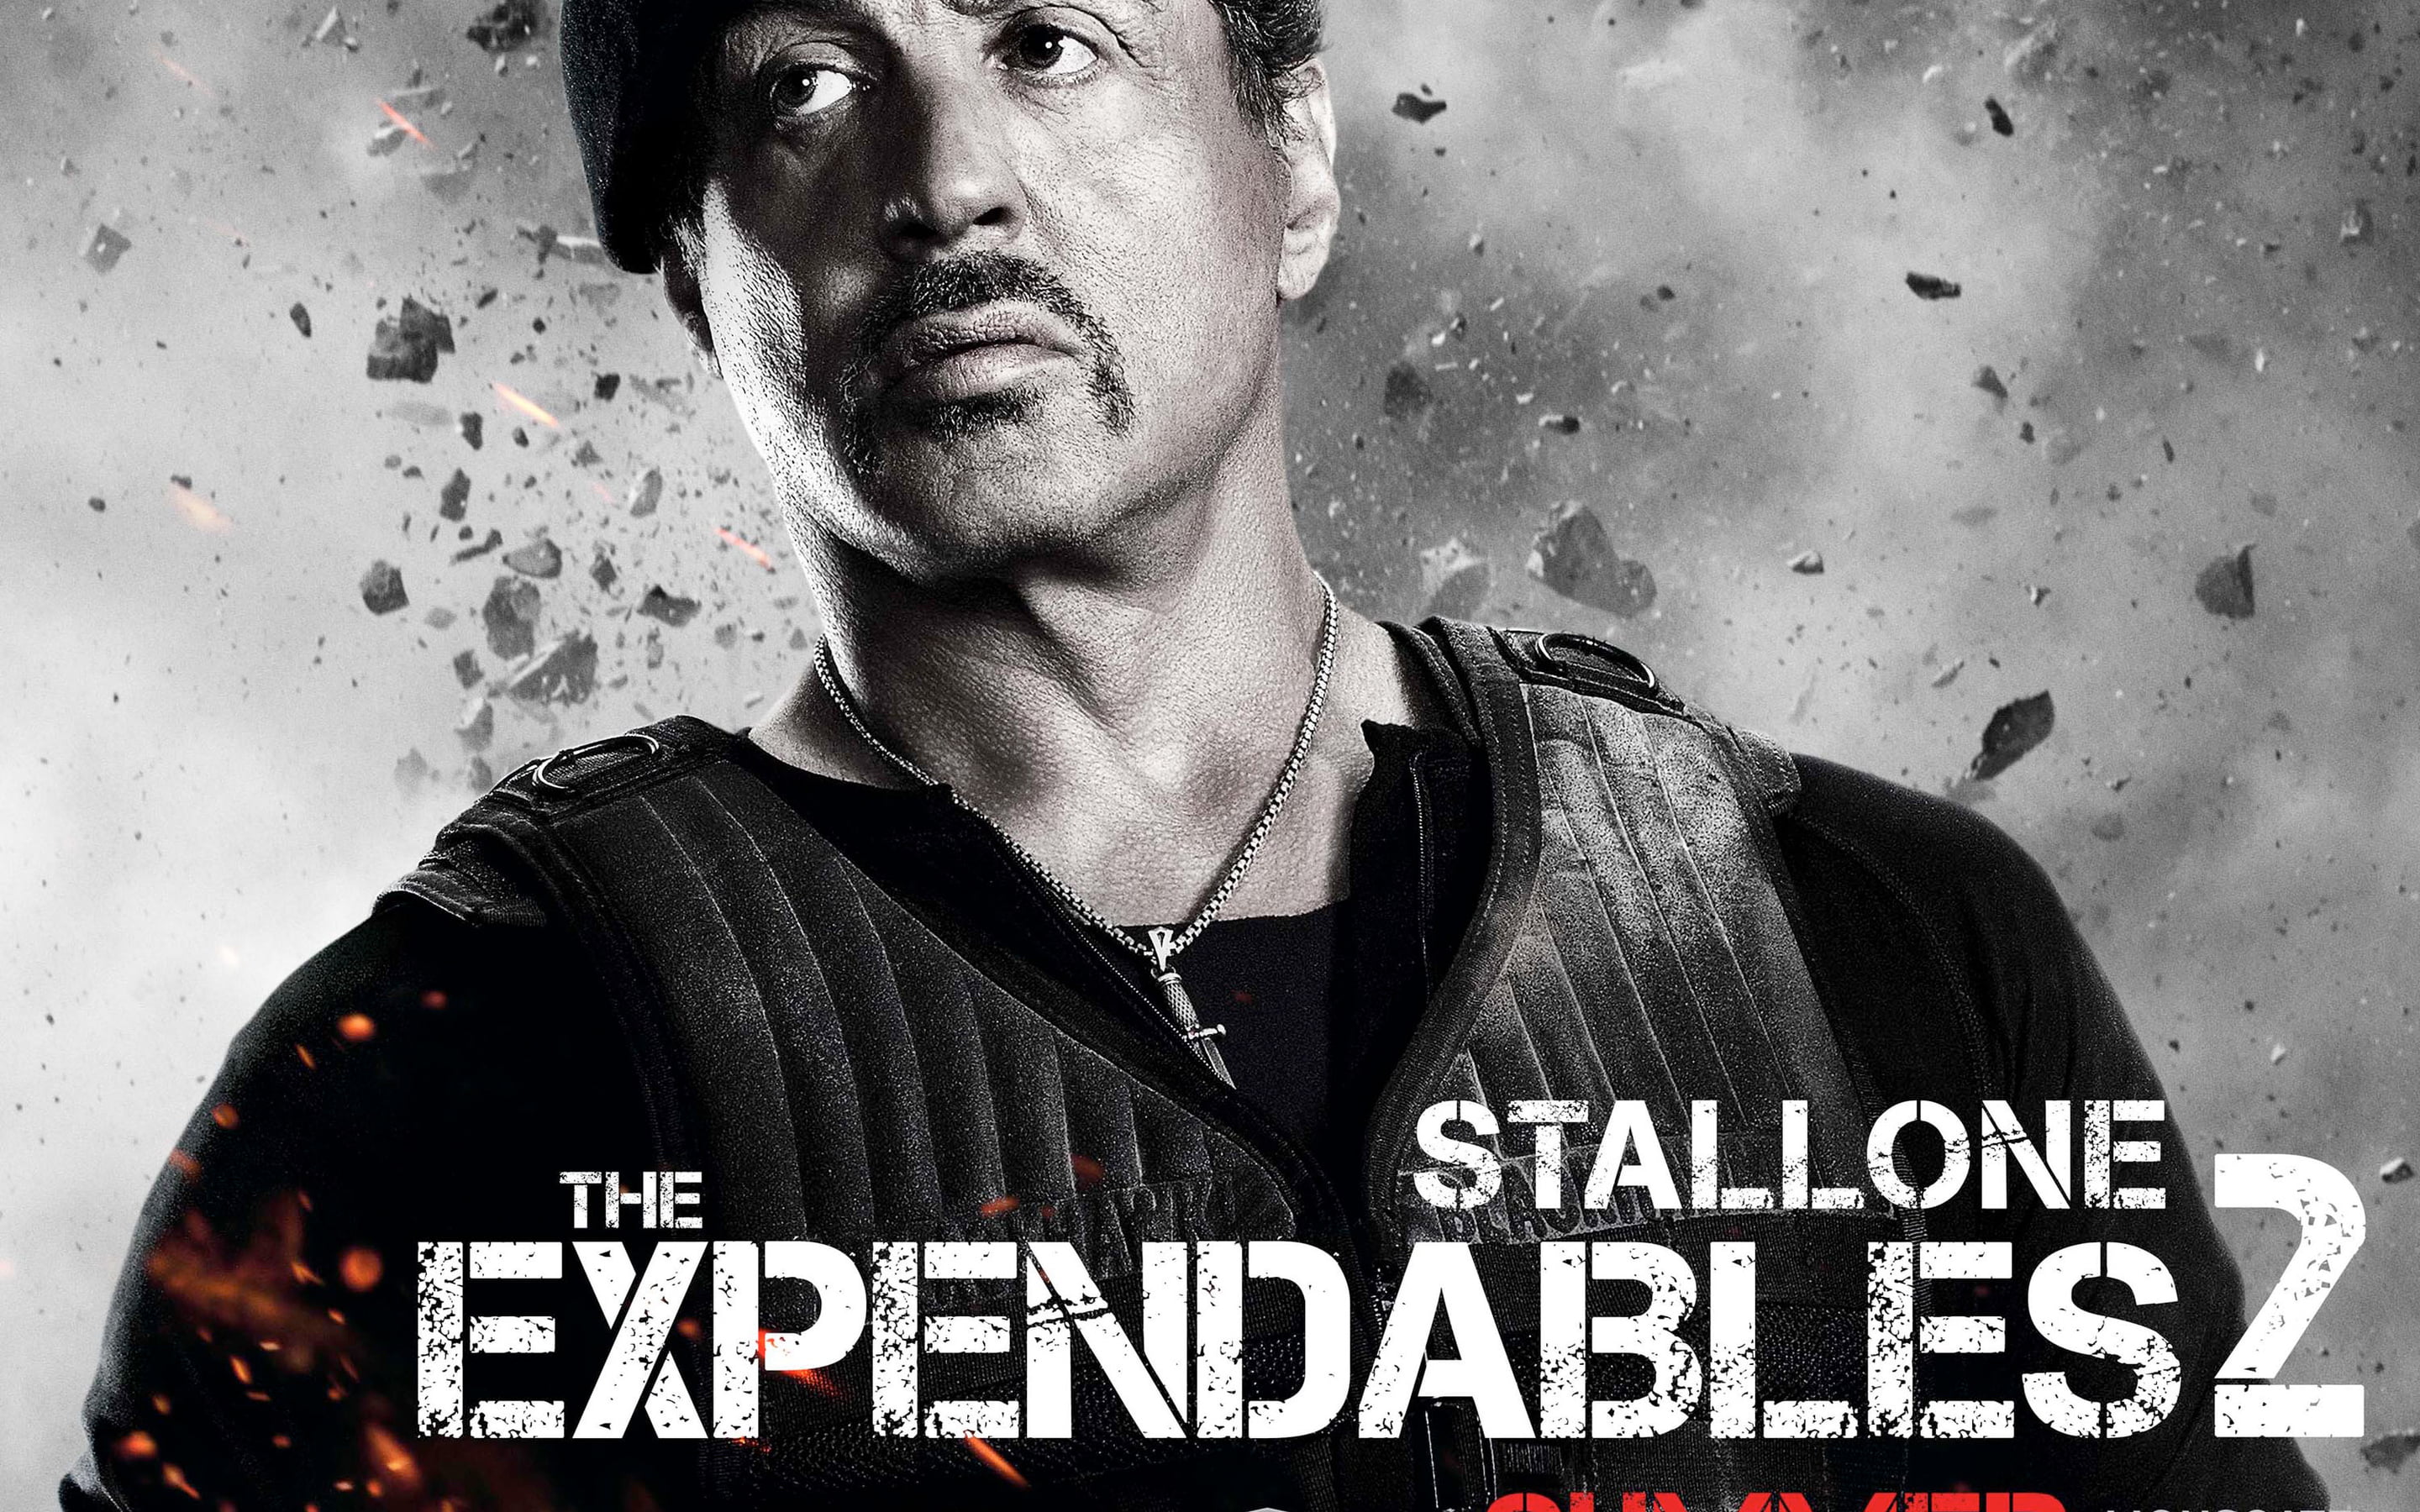 The Expendables 2 Stallone poster, sylvester stallone, barney ross